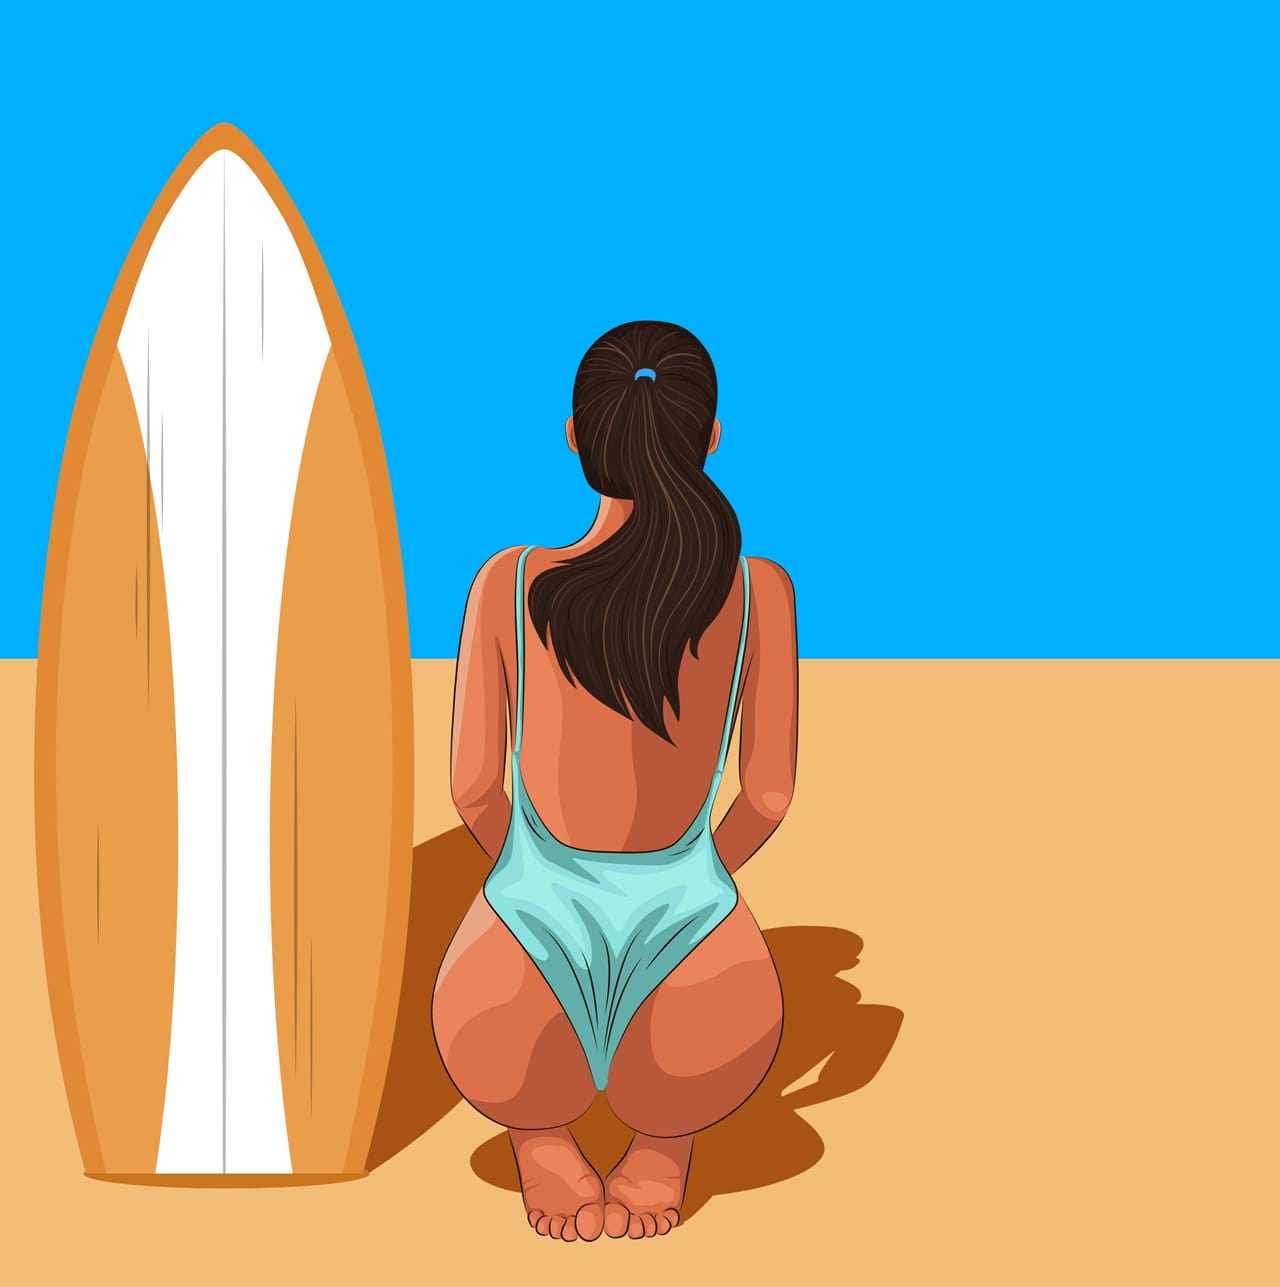 Beach clipart young surfer girl swimsuit with surfboard hand drawing sketch cartoon image